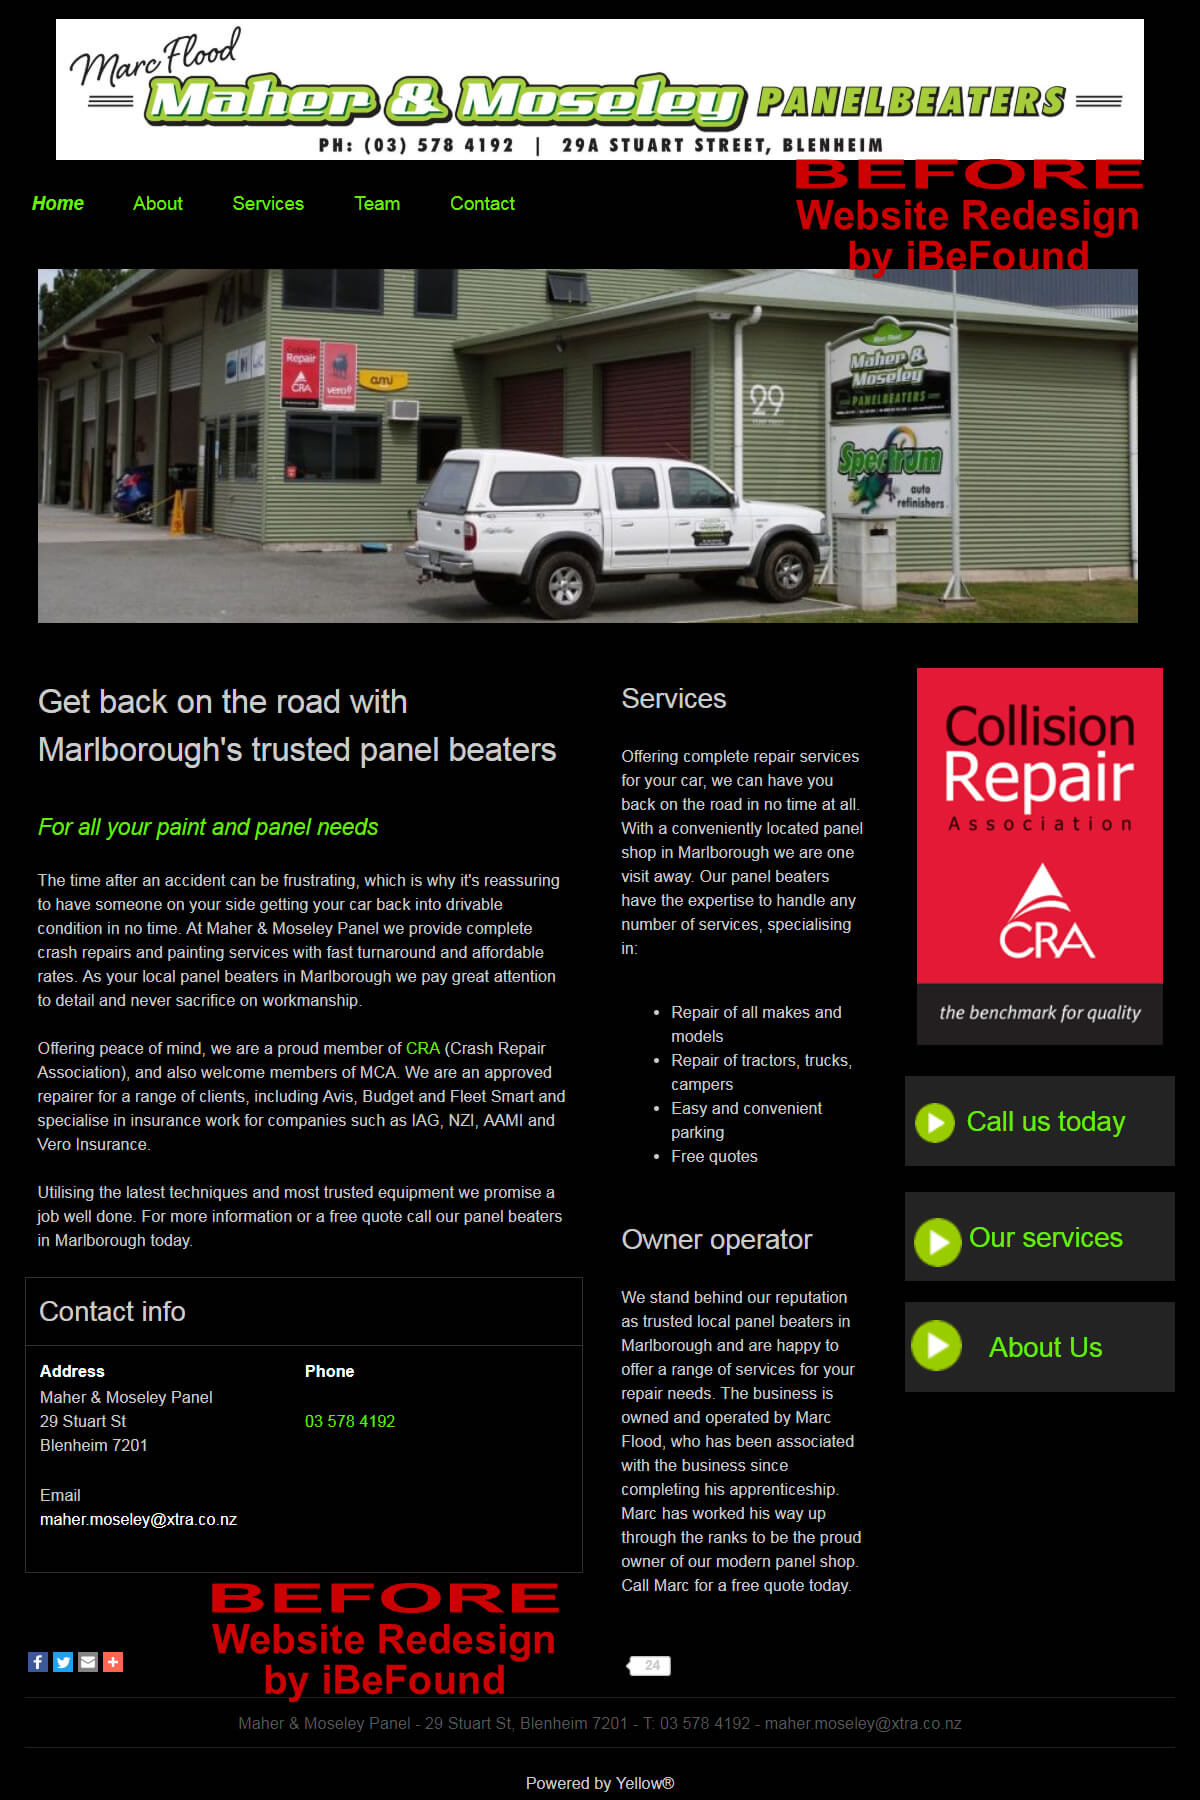 Homepage Of Marlborough Panel And Paint Before Website Redesign By IBeFound Digital Marketing Division